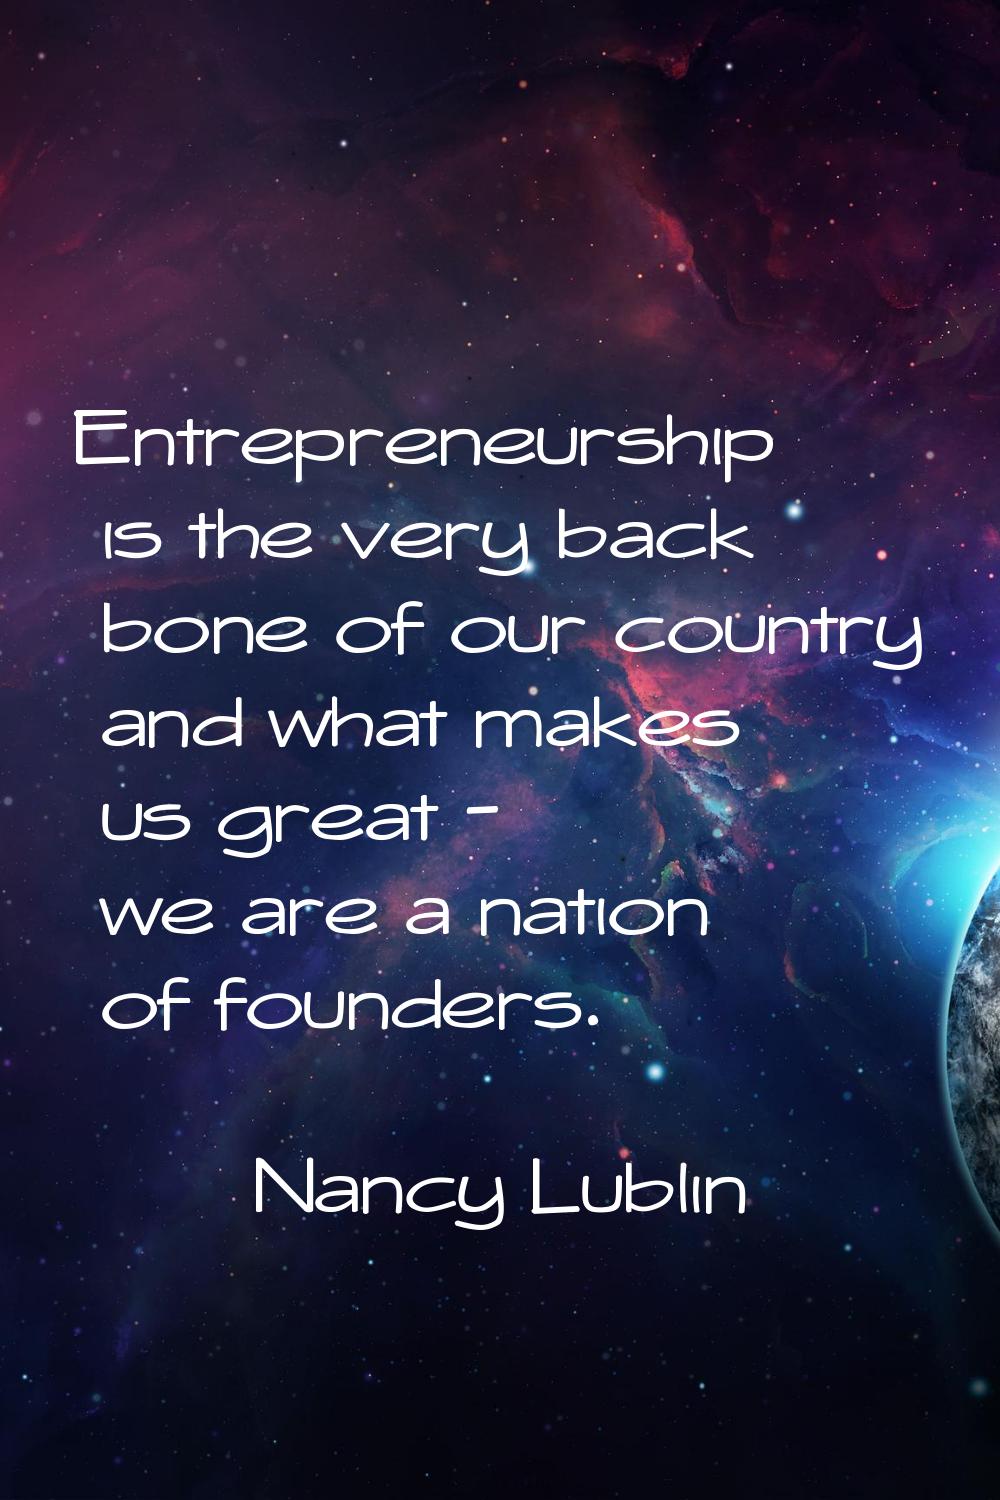 Entrepreneurship is the very back bone of our country and what makes us great - we are a nation of 